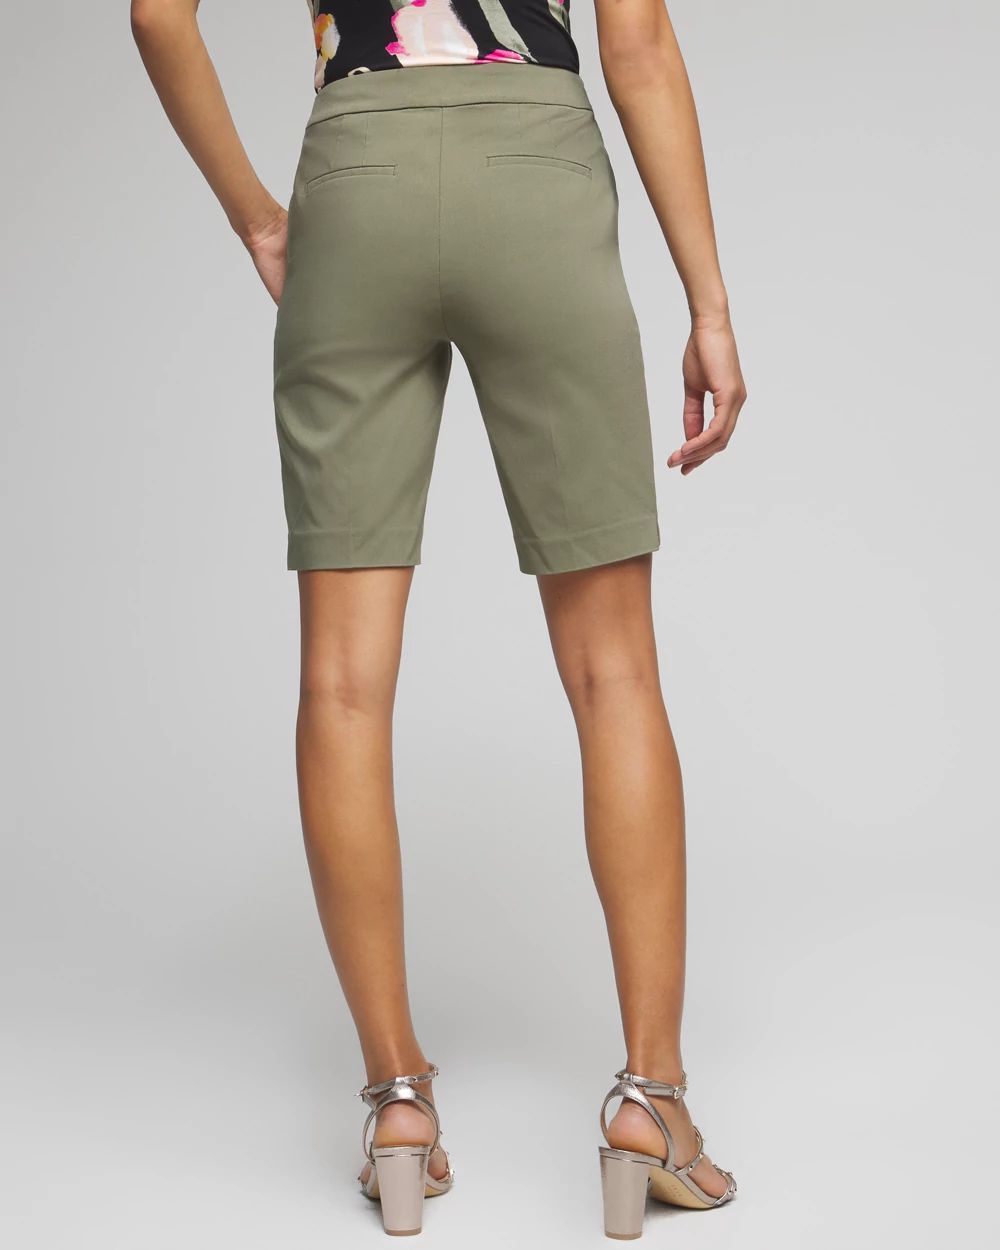 Outlet WHBM 10-Inch Bermuda Shorts